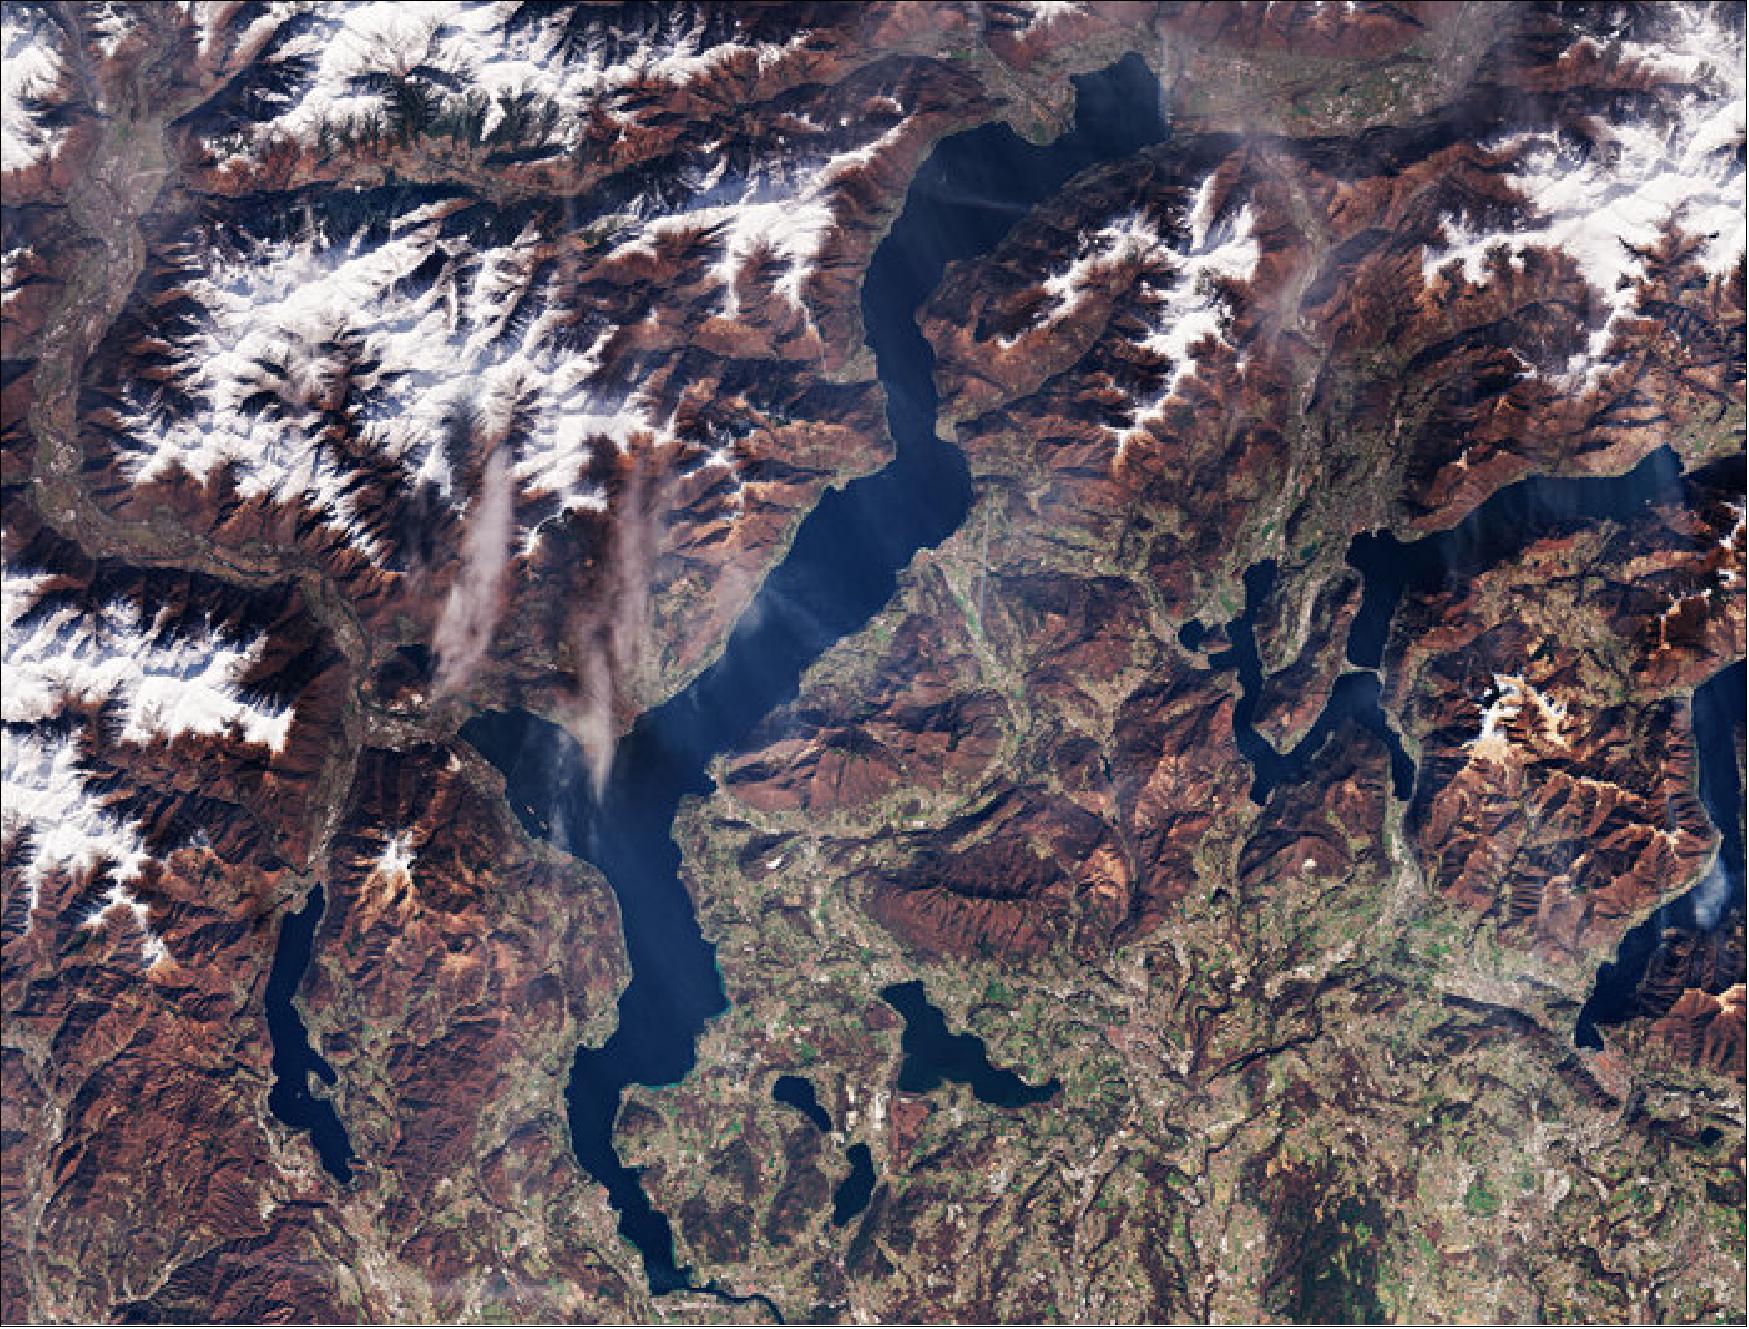 Figure 11: Lake Maggiore and Baveno. The manifesto that gave rise to Europe’s Copernicus program was signed in 1998 in Baveno, which lies on the southwest shore of Lake Maggiore in Italy. This image was captured by the Copernicus Sentinel-2 mission on 8 March 2017 (image credit: ESA, the image contains modified Copernicus Sentinel data (2017), processed by ESA)